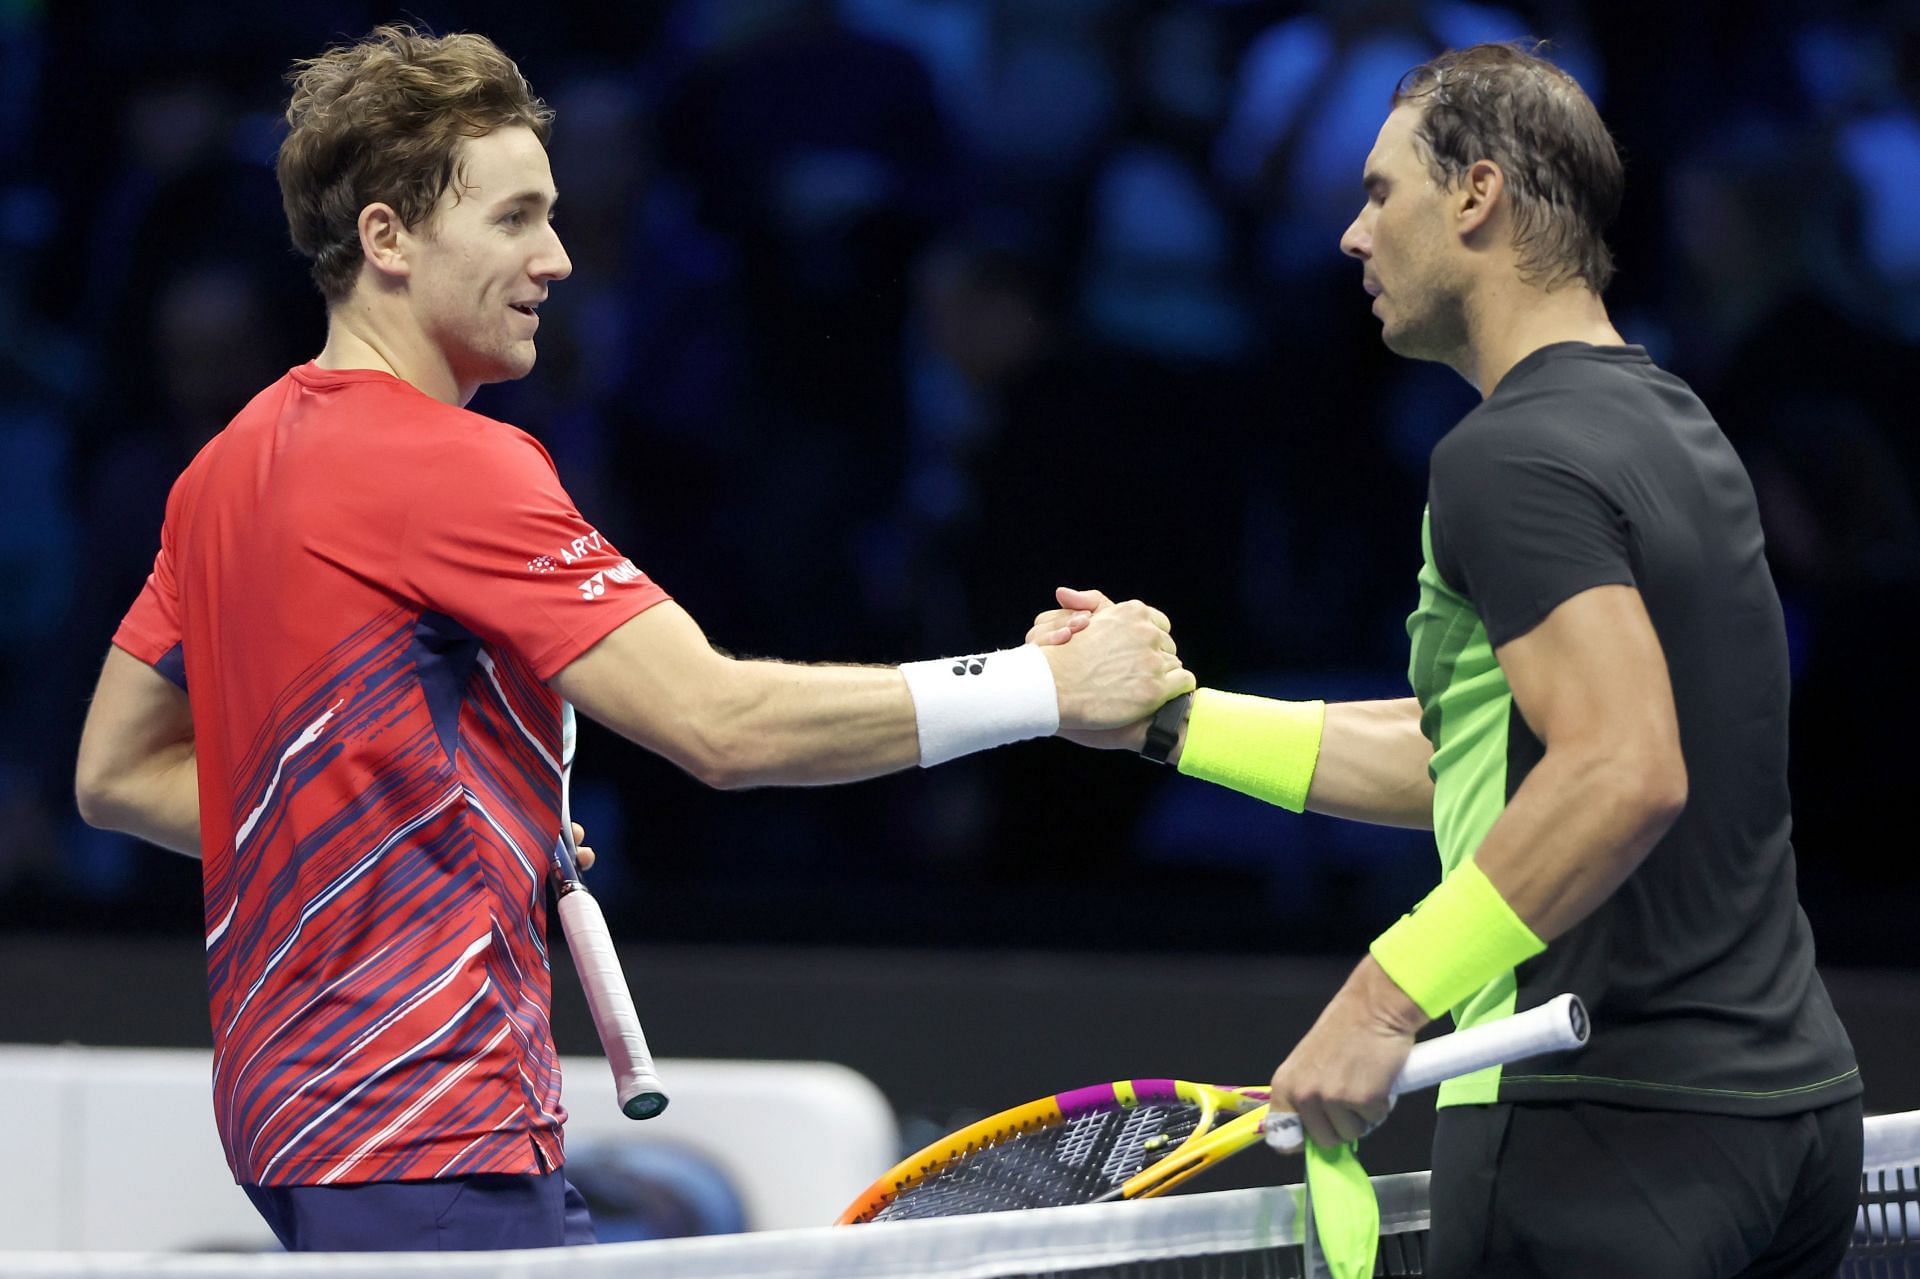 Casper Ruud (left) shakes hands with Rafael Nadal (right) after their round-robin match in the 2022 ATP Finals.